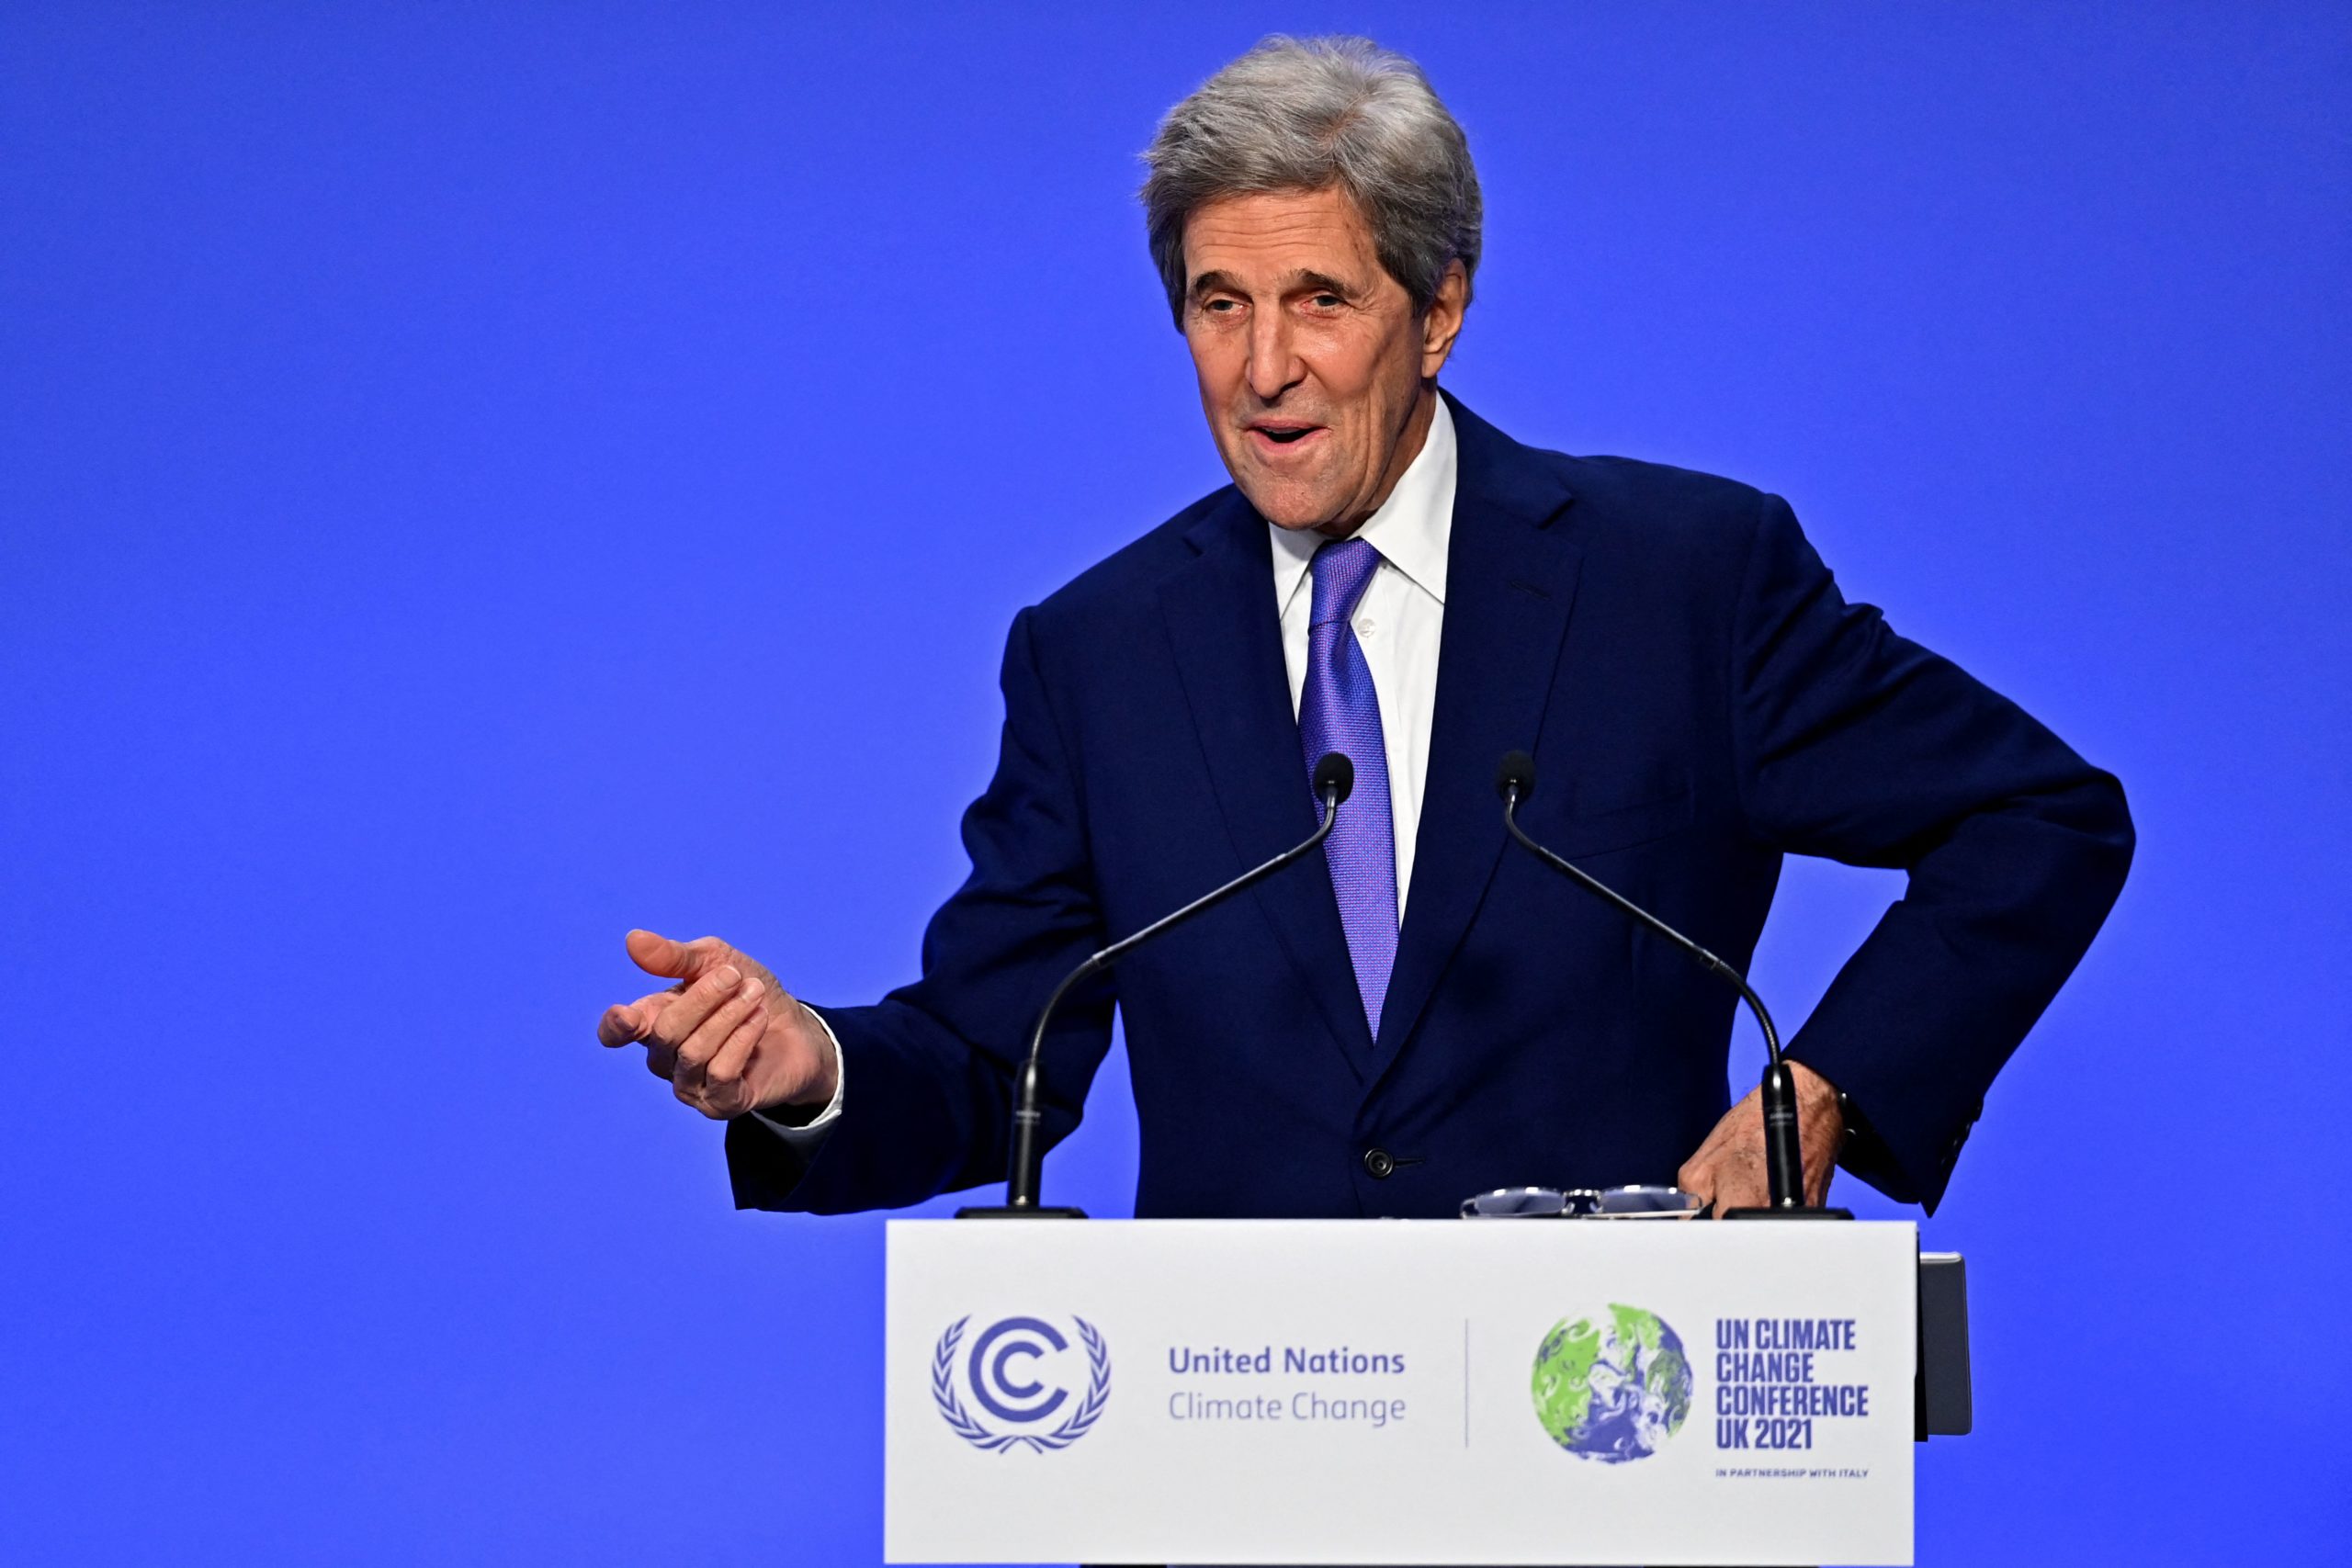 U.S. Climate Envoy John Kerry speaks at a press conference at the COP26 United Nations Climate Change Conference in Glasgow on Nov. 13. (Paul Ellis/AFP via Getty Images)